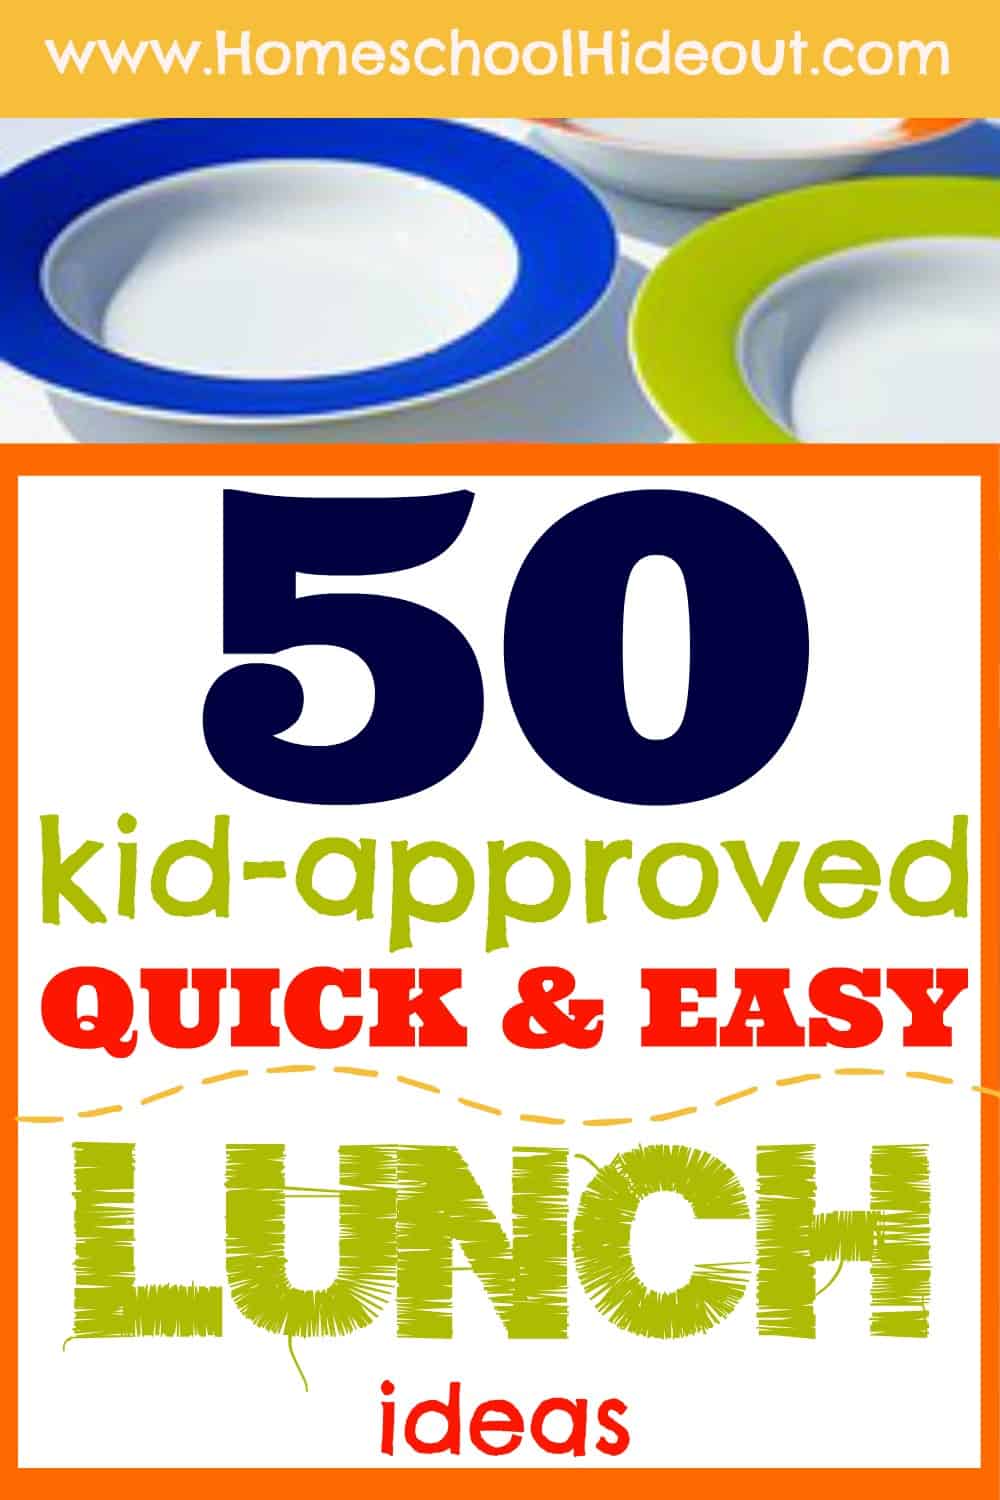 Sick of sandwiches? I LOVE this list of quick and easy foods to make the kids for lunch. Waving goodbye to chips and sandwiches!